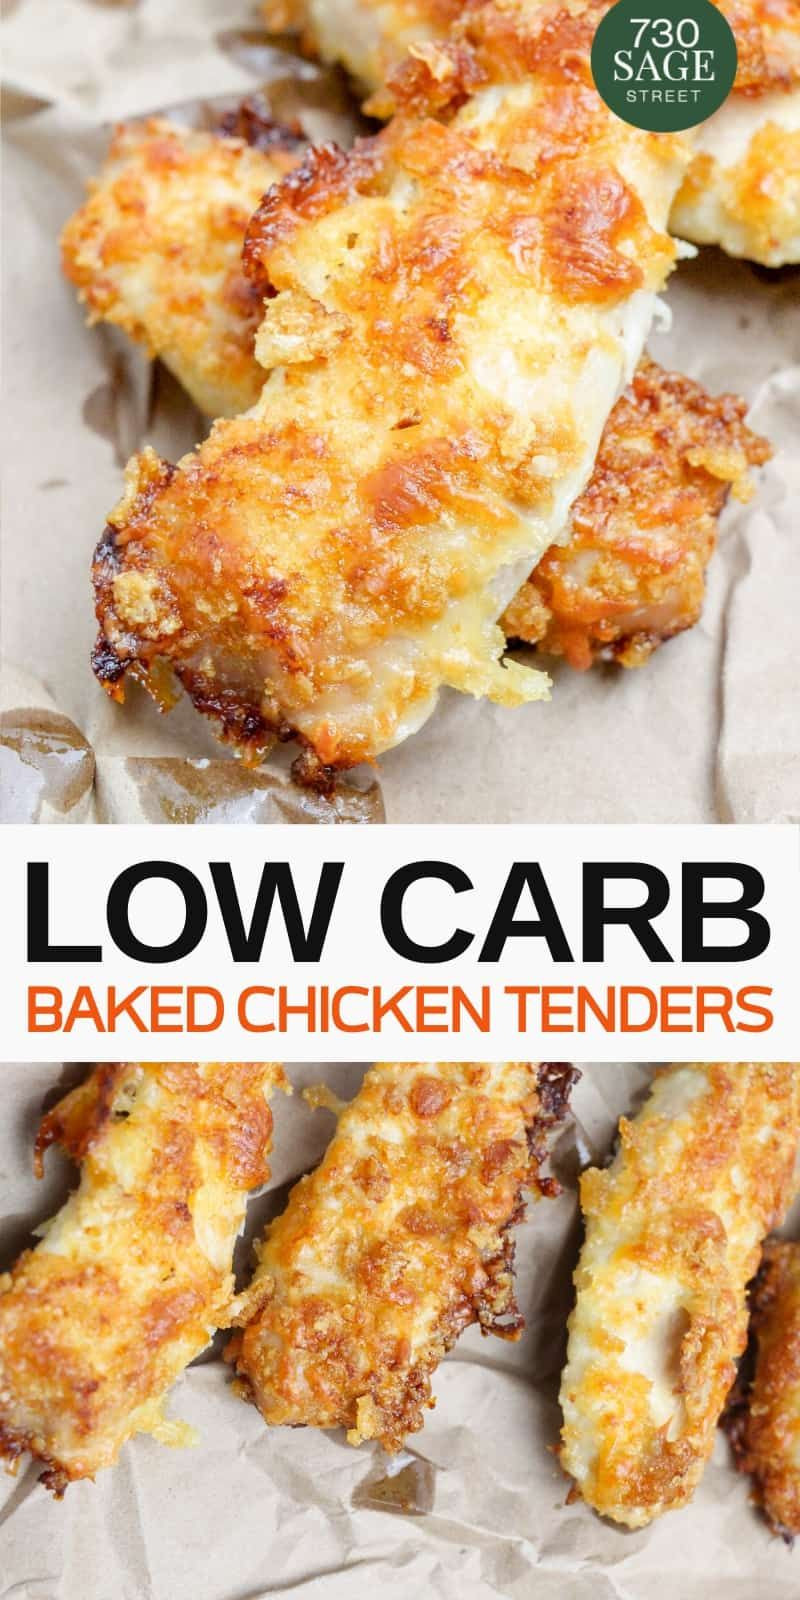 Low Carb Breaded Chicken Tenders
 Enjoy a low carb version of breaded chicken with these